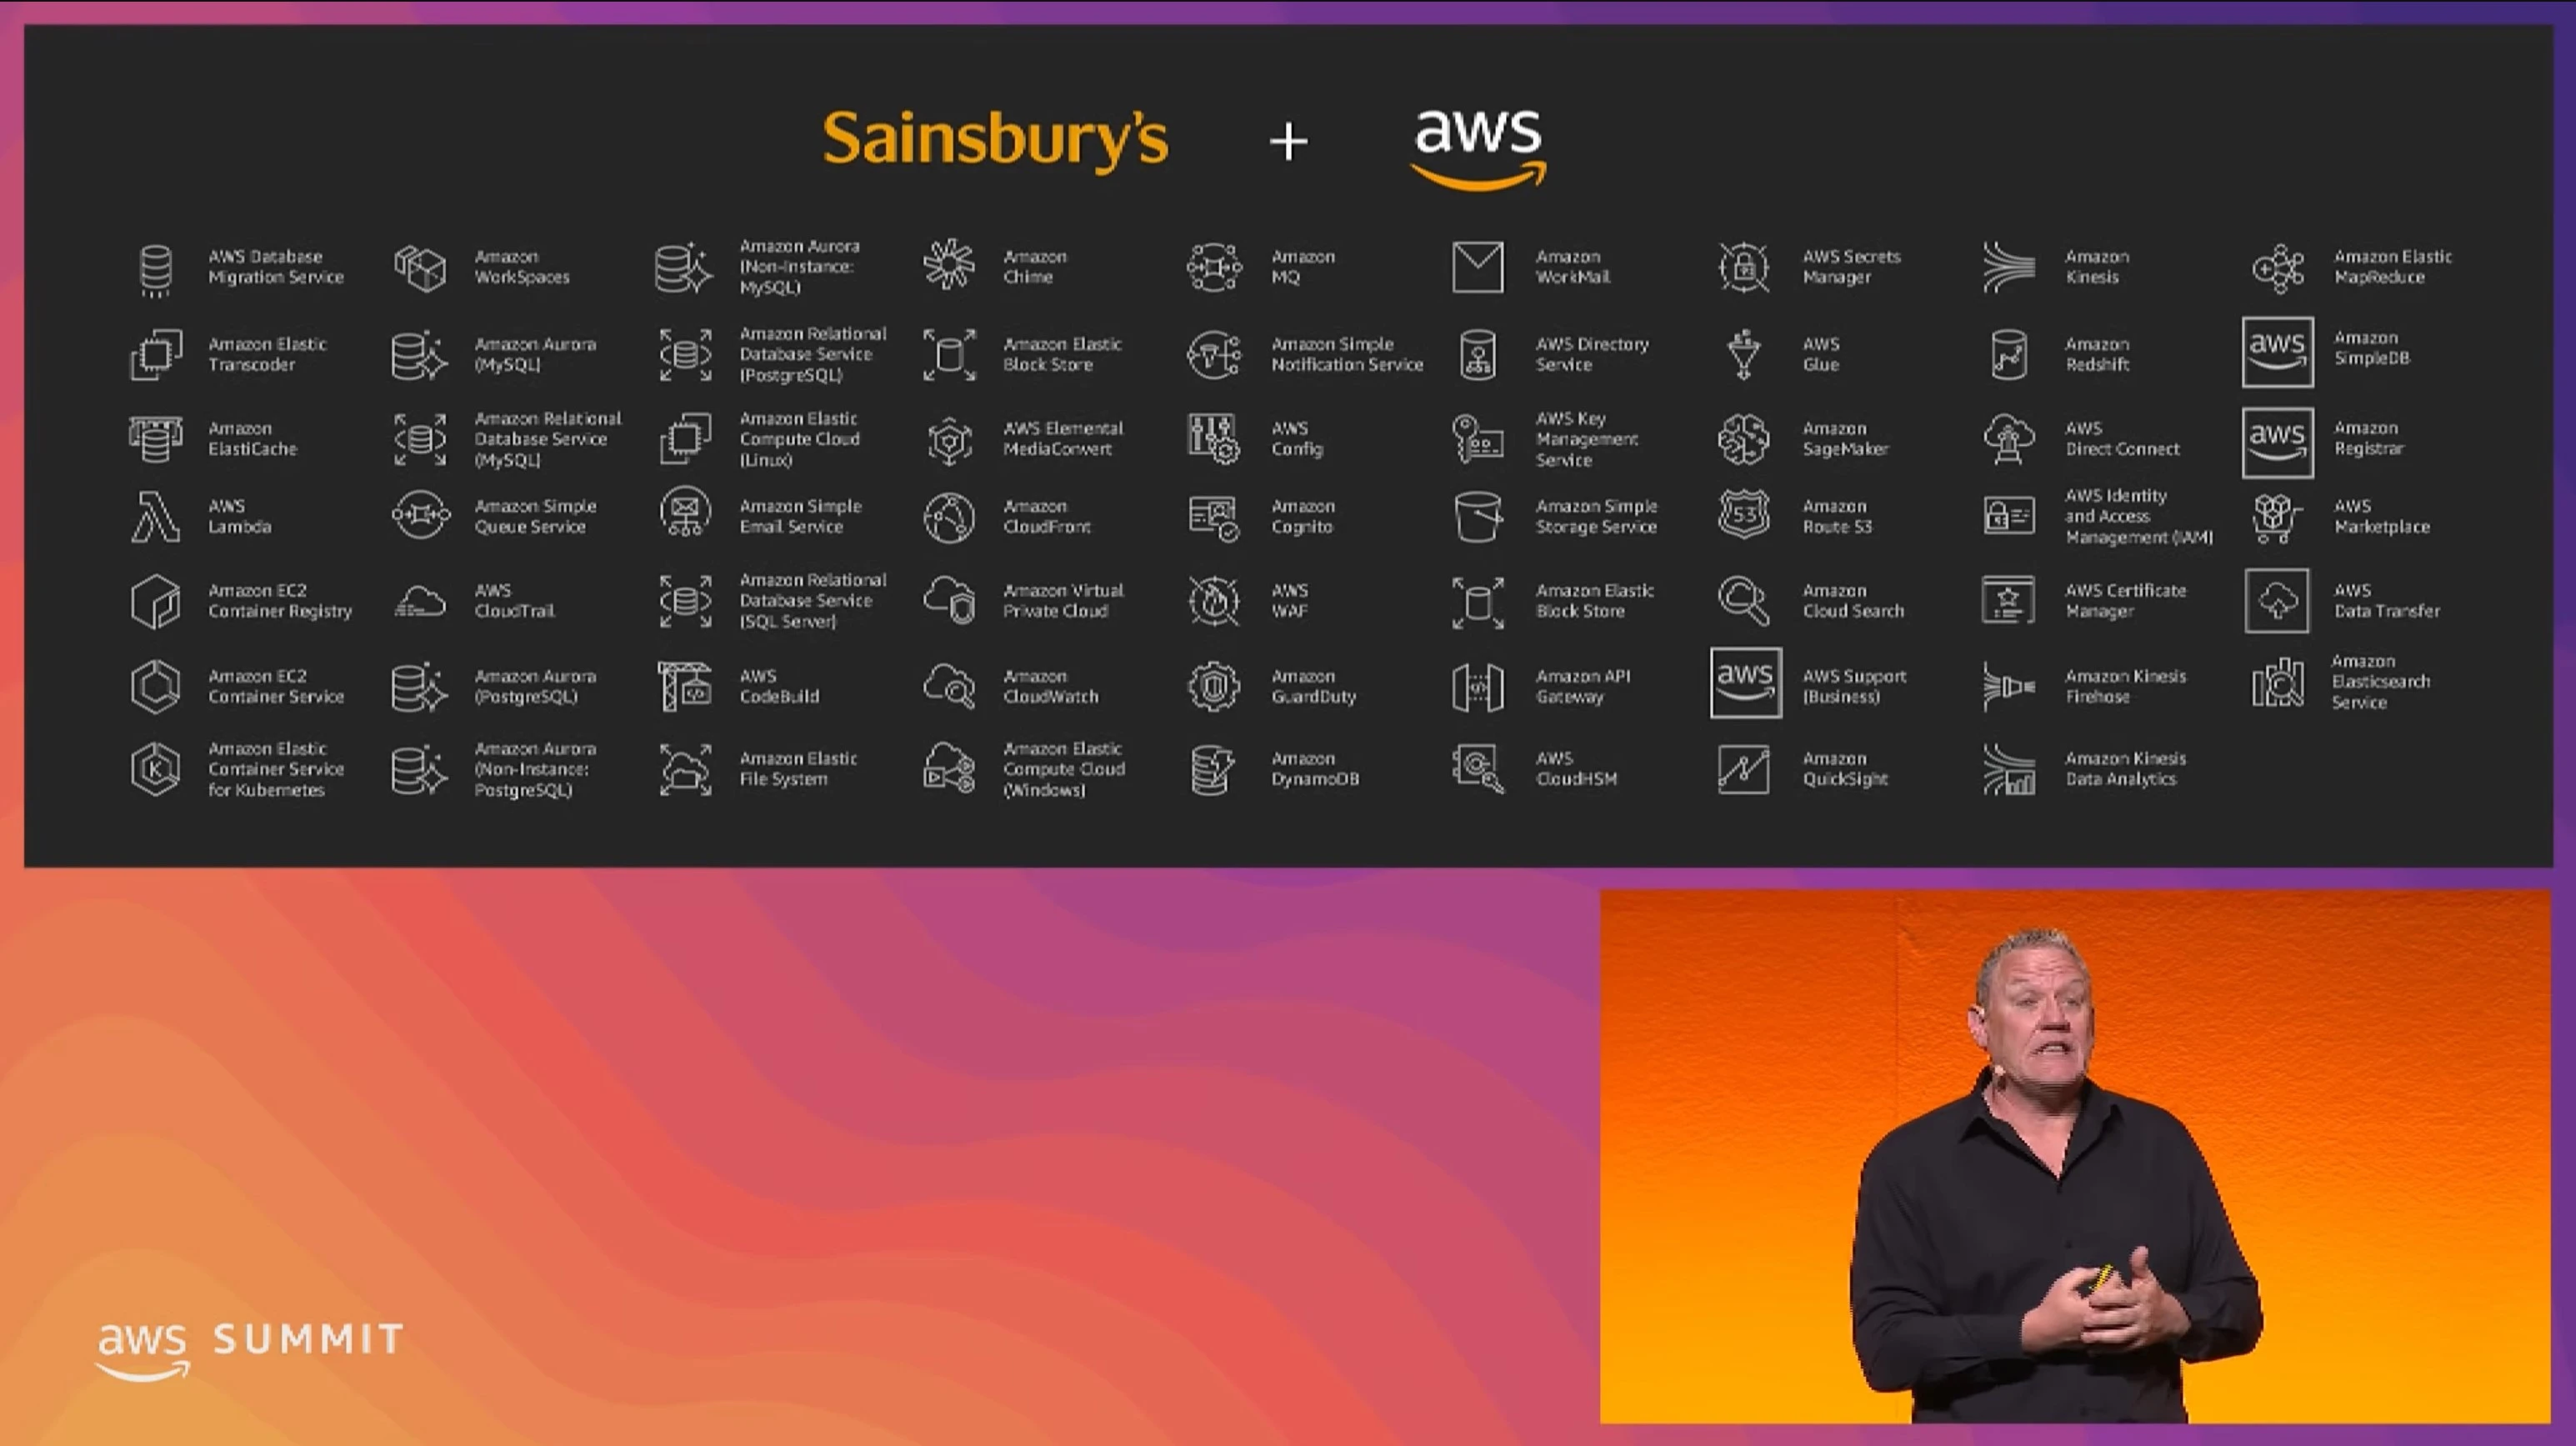 A wide range of AWS services Sainsbury's uses, from Elastic Transcoder to CloudHSM!